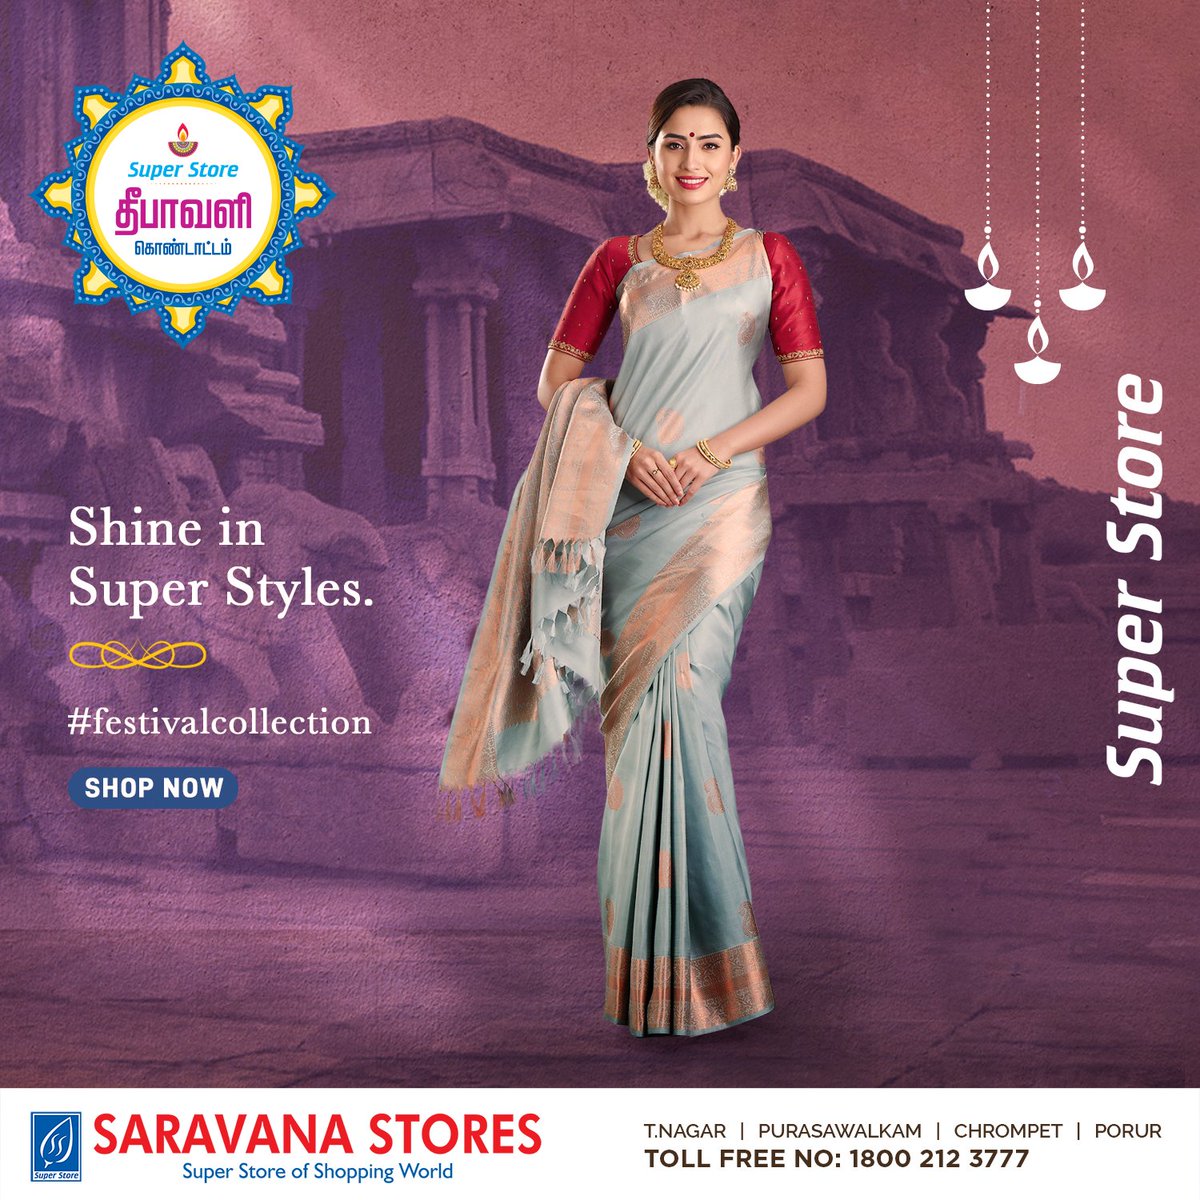 Experience the glory of festive silk saris from Super Saravana Stores;  perfect for a joyous afternoon with the family or an intimate dinner under the stars. 
.
#superstore #supersilks #silk #kidswear #diwali #diwalistyle #festivalcollection #supersaravanastores #newcollections